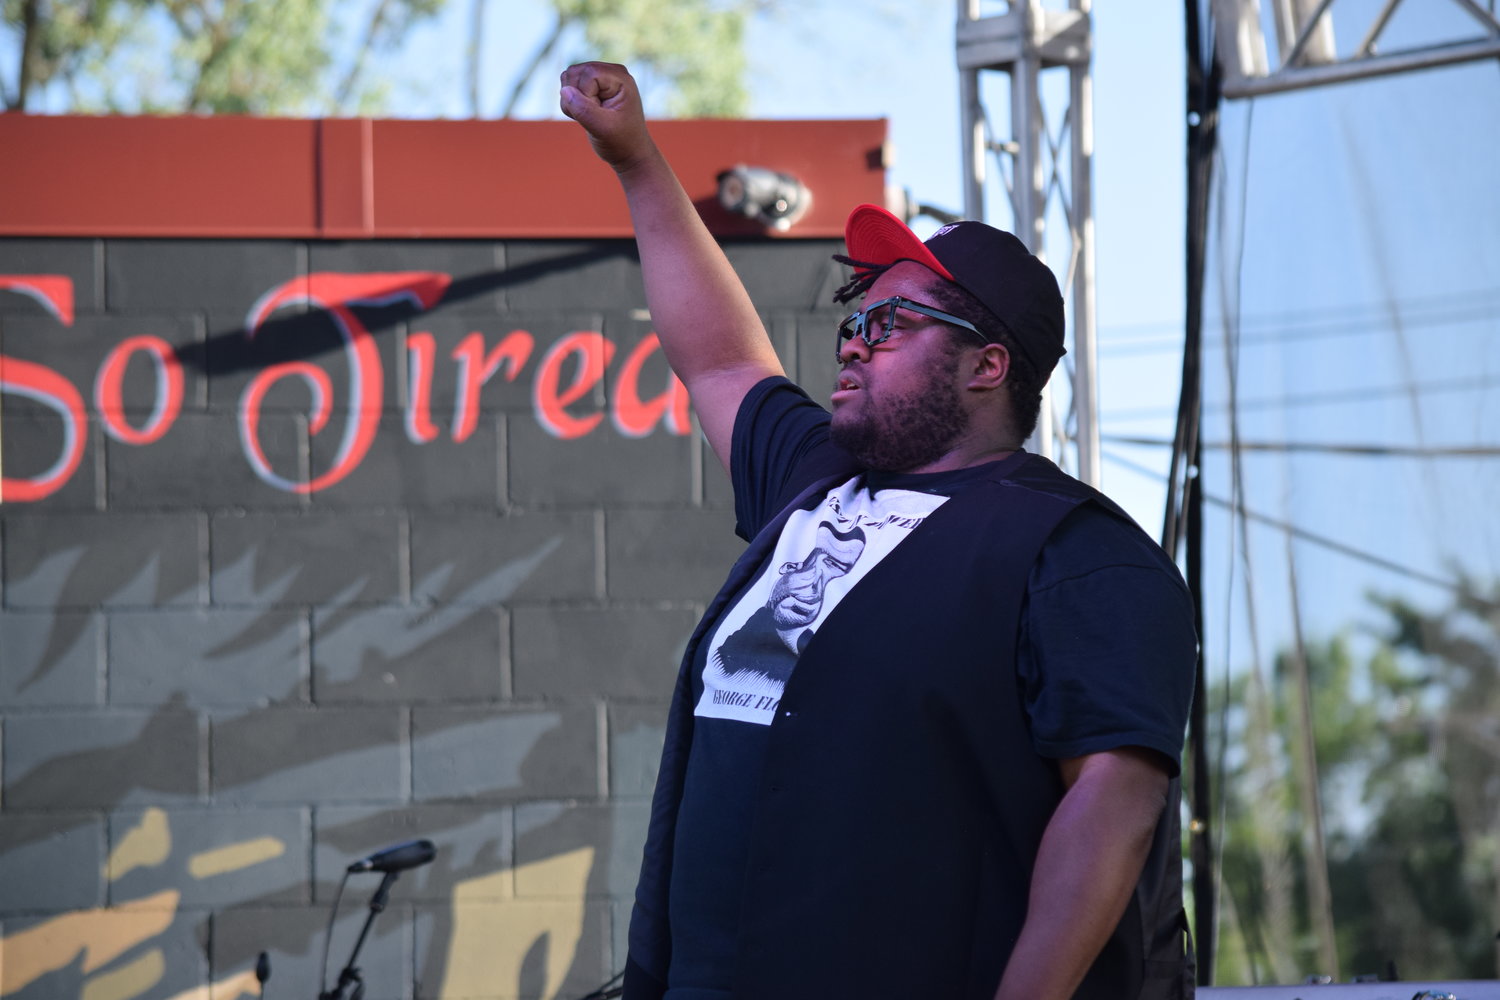 Minneapolis’ Nur-D sings “8:46” from his album “38th,” followed by “Swing Low, Sweet Chariot.” The day before the concert, Nur-D tweeted: 
“Tomorrow at the corner of 38th & Chicago Ave
We’re going to be turning mourning into dancing
We’re going to be celebrating 365 days of strength in the face of injustice
And how #Minnesota & #Minneapolis changed the WORLD forever in the wake of tragedy
I’ll see you there”